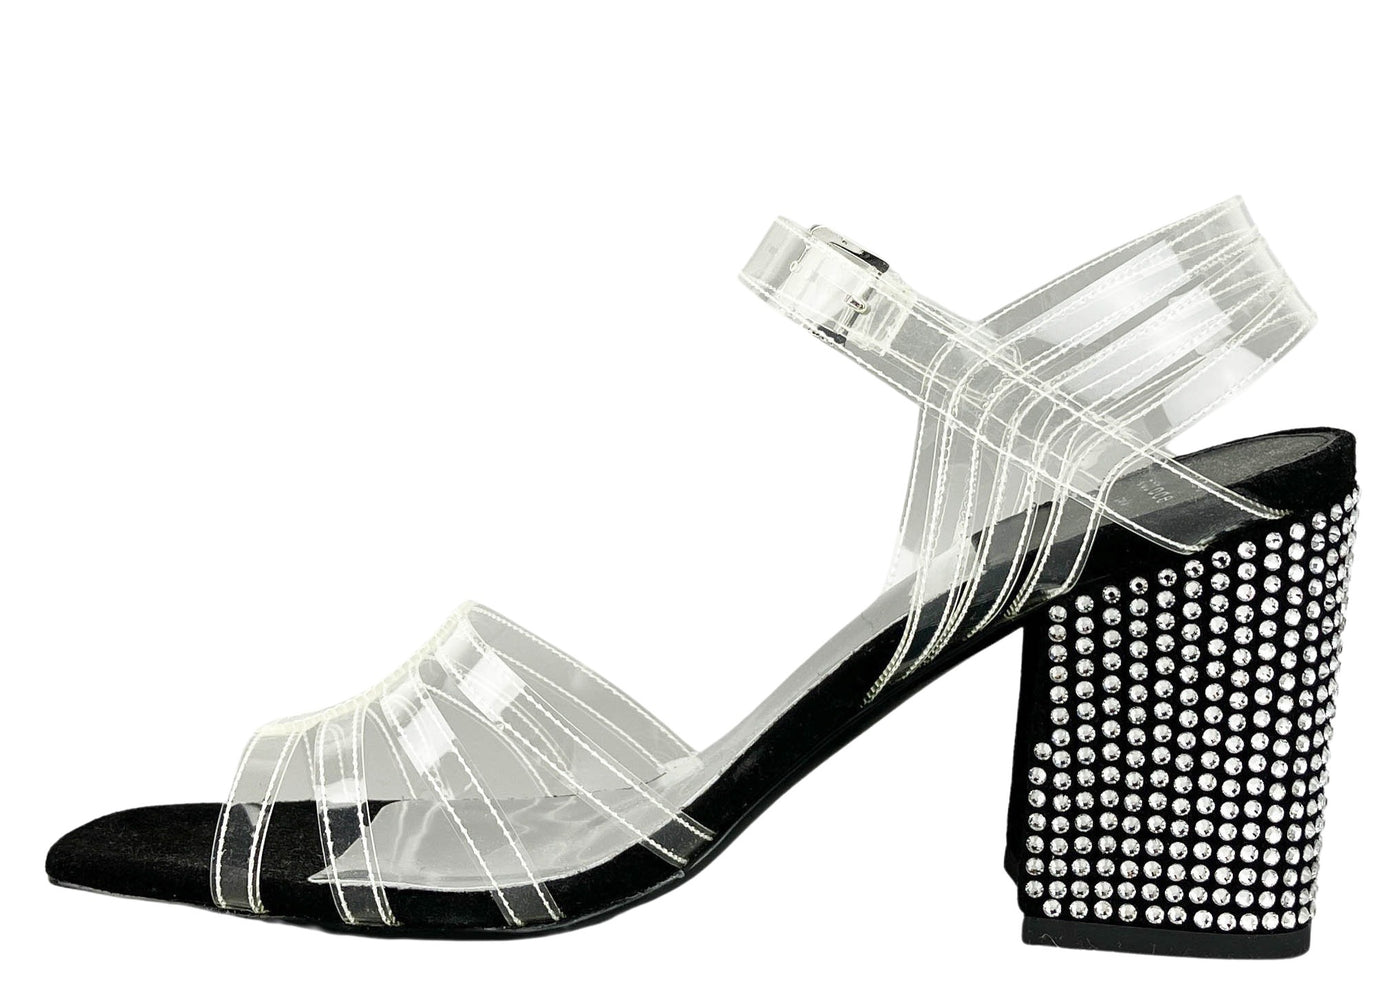 Laurence Dacade Germanie Sandals in Black and Silver - Discounts on Laurence Dacade at UAL